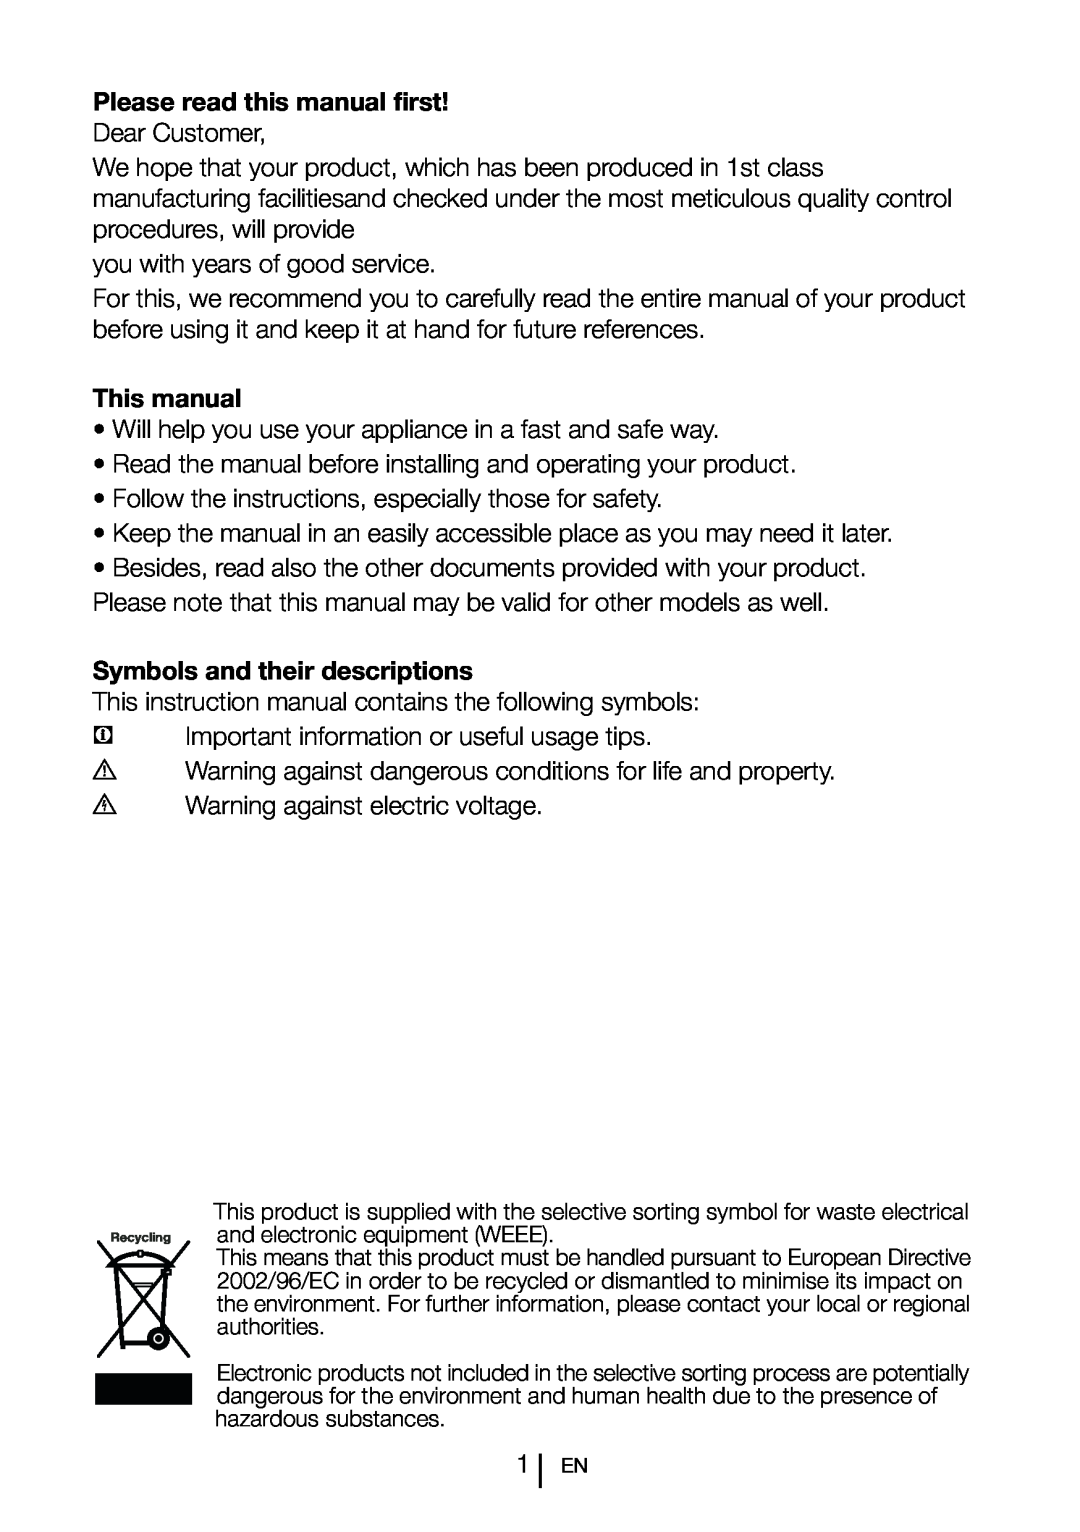 Beko TL 685 APW Please read this manual first, This manual, Symbols and their descriptions 